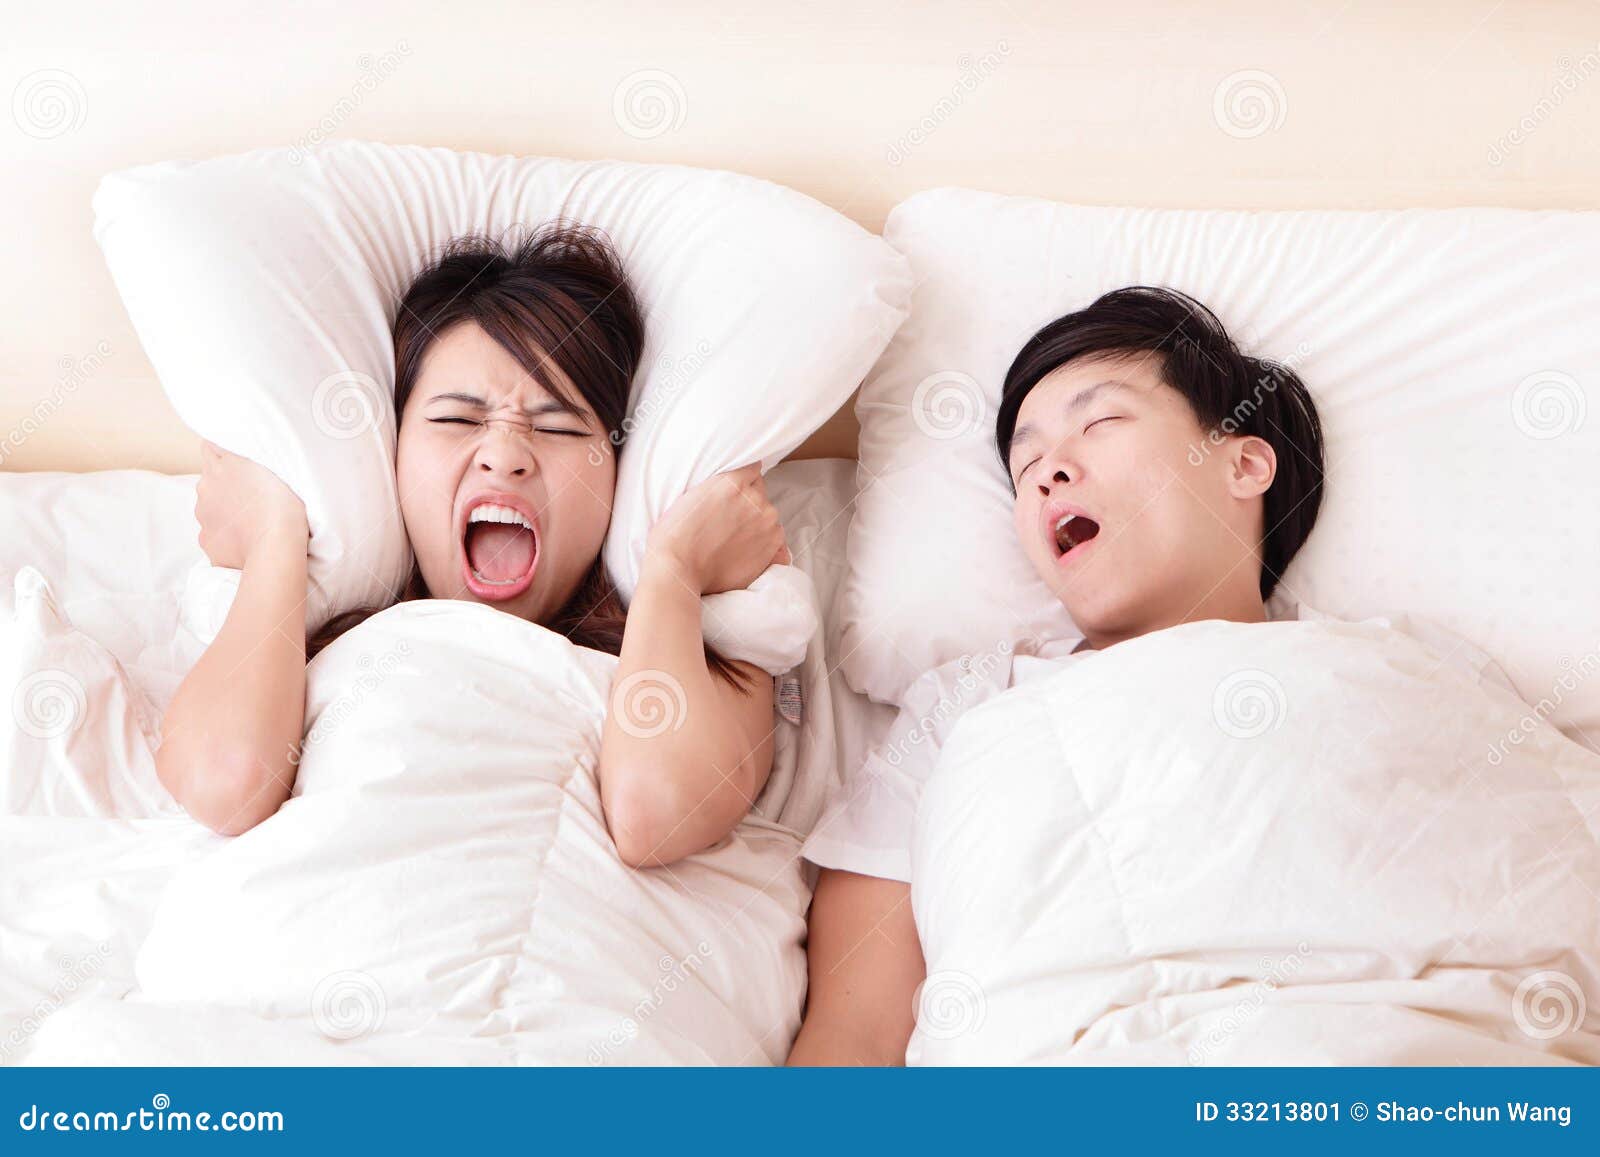 young woman disturbed by the snores of her husband